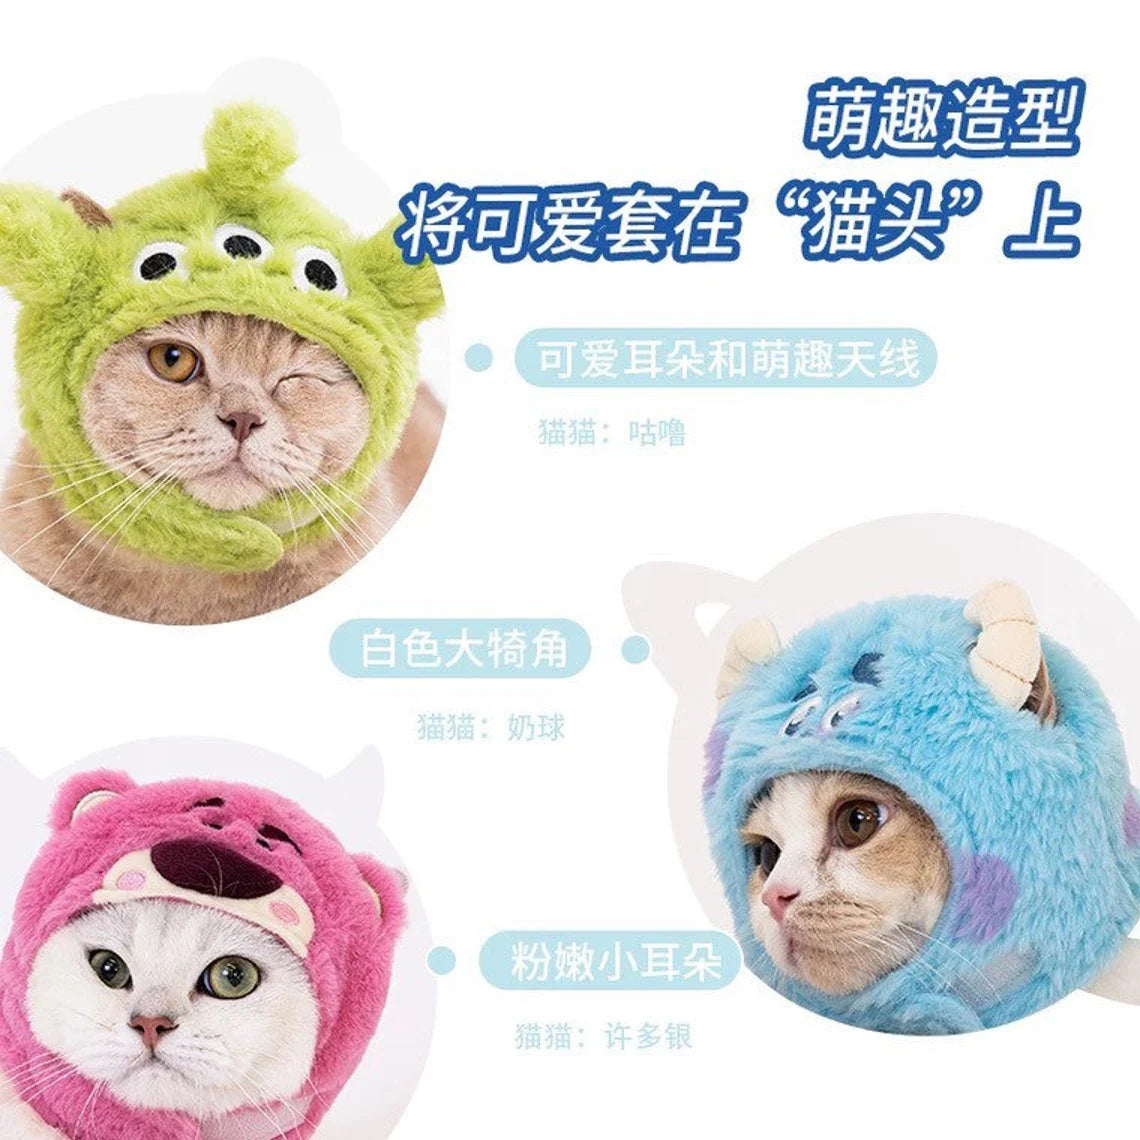 Disney Pet Helme for Cat Toy Story Alien Monsters Inc Sully Lotso Strawberry Bear Accessory Outfits